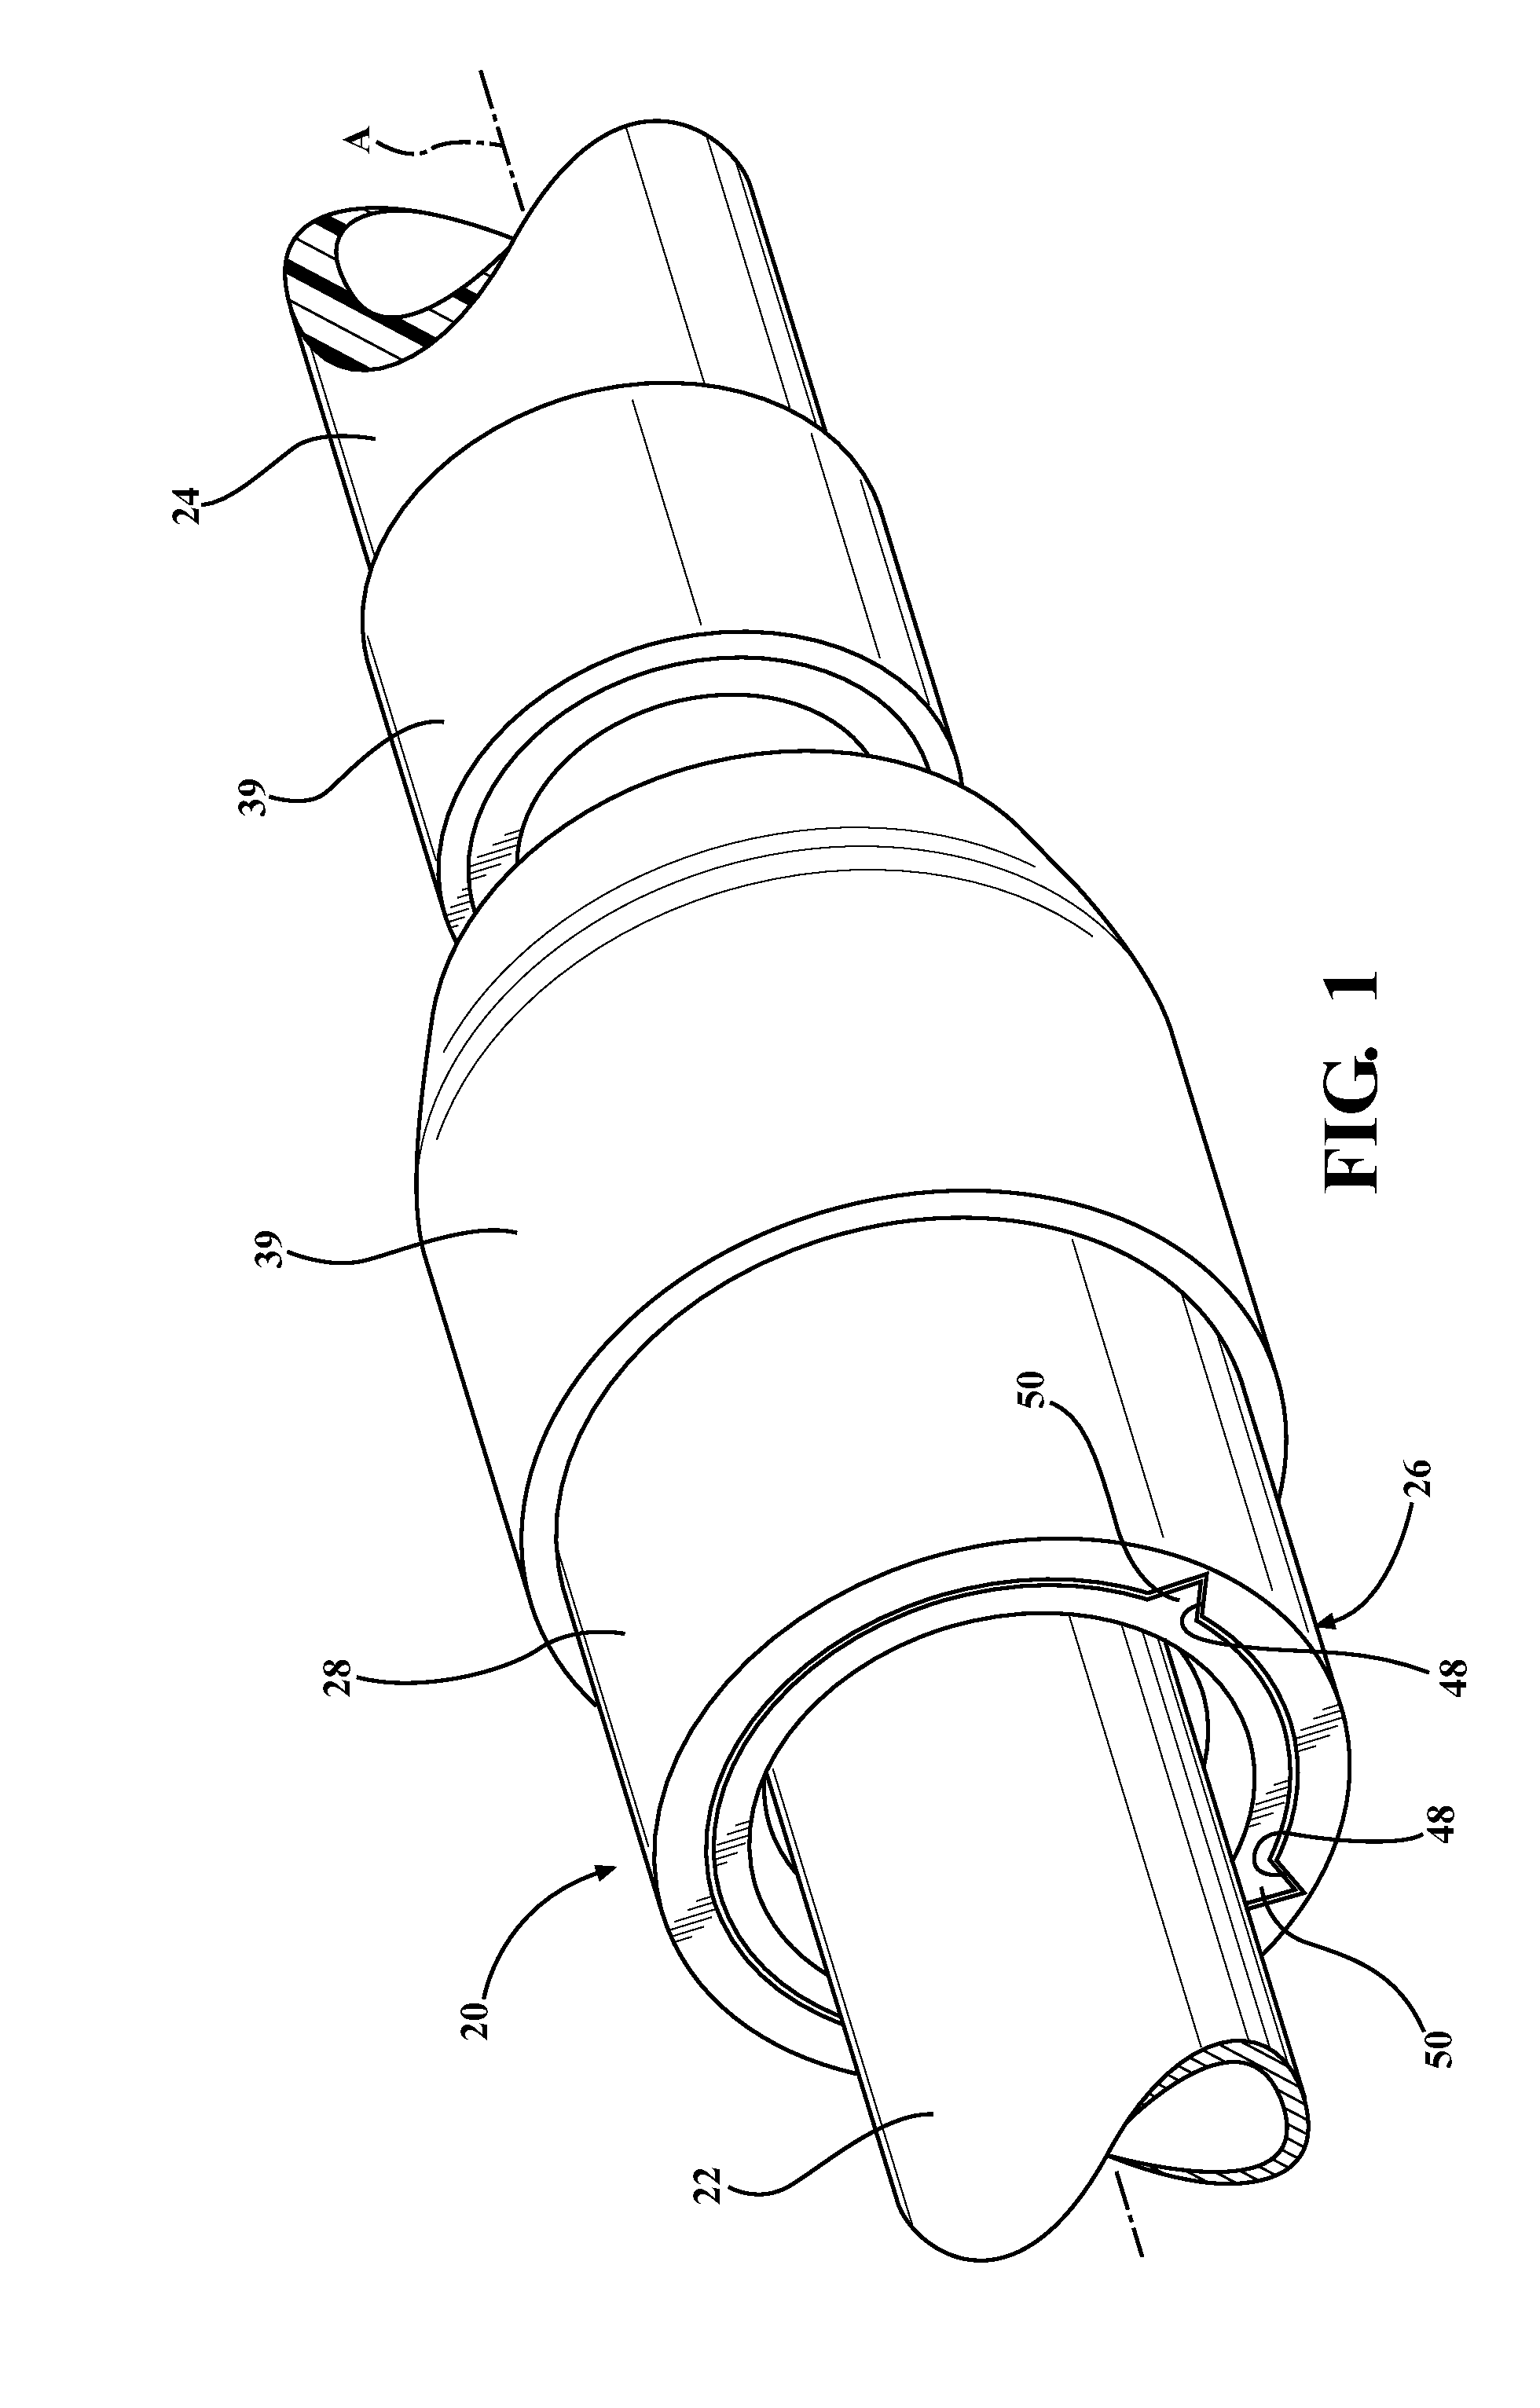 Pipe connector assembly